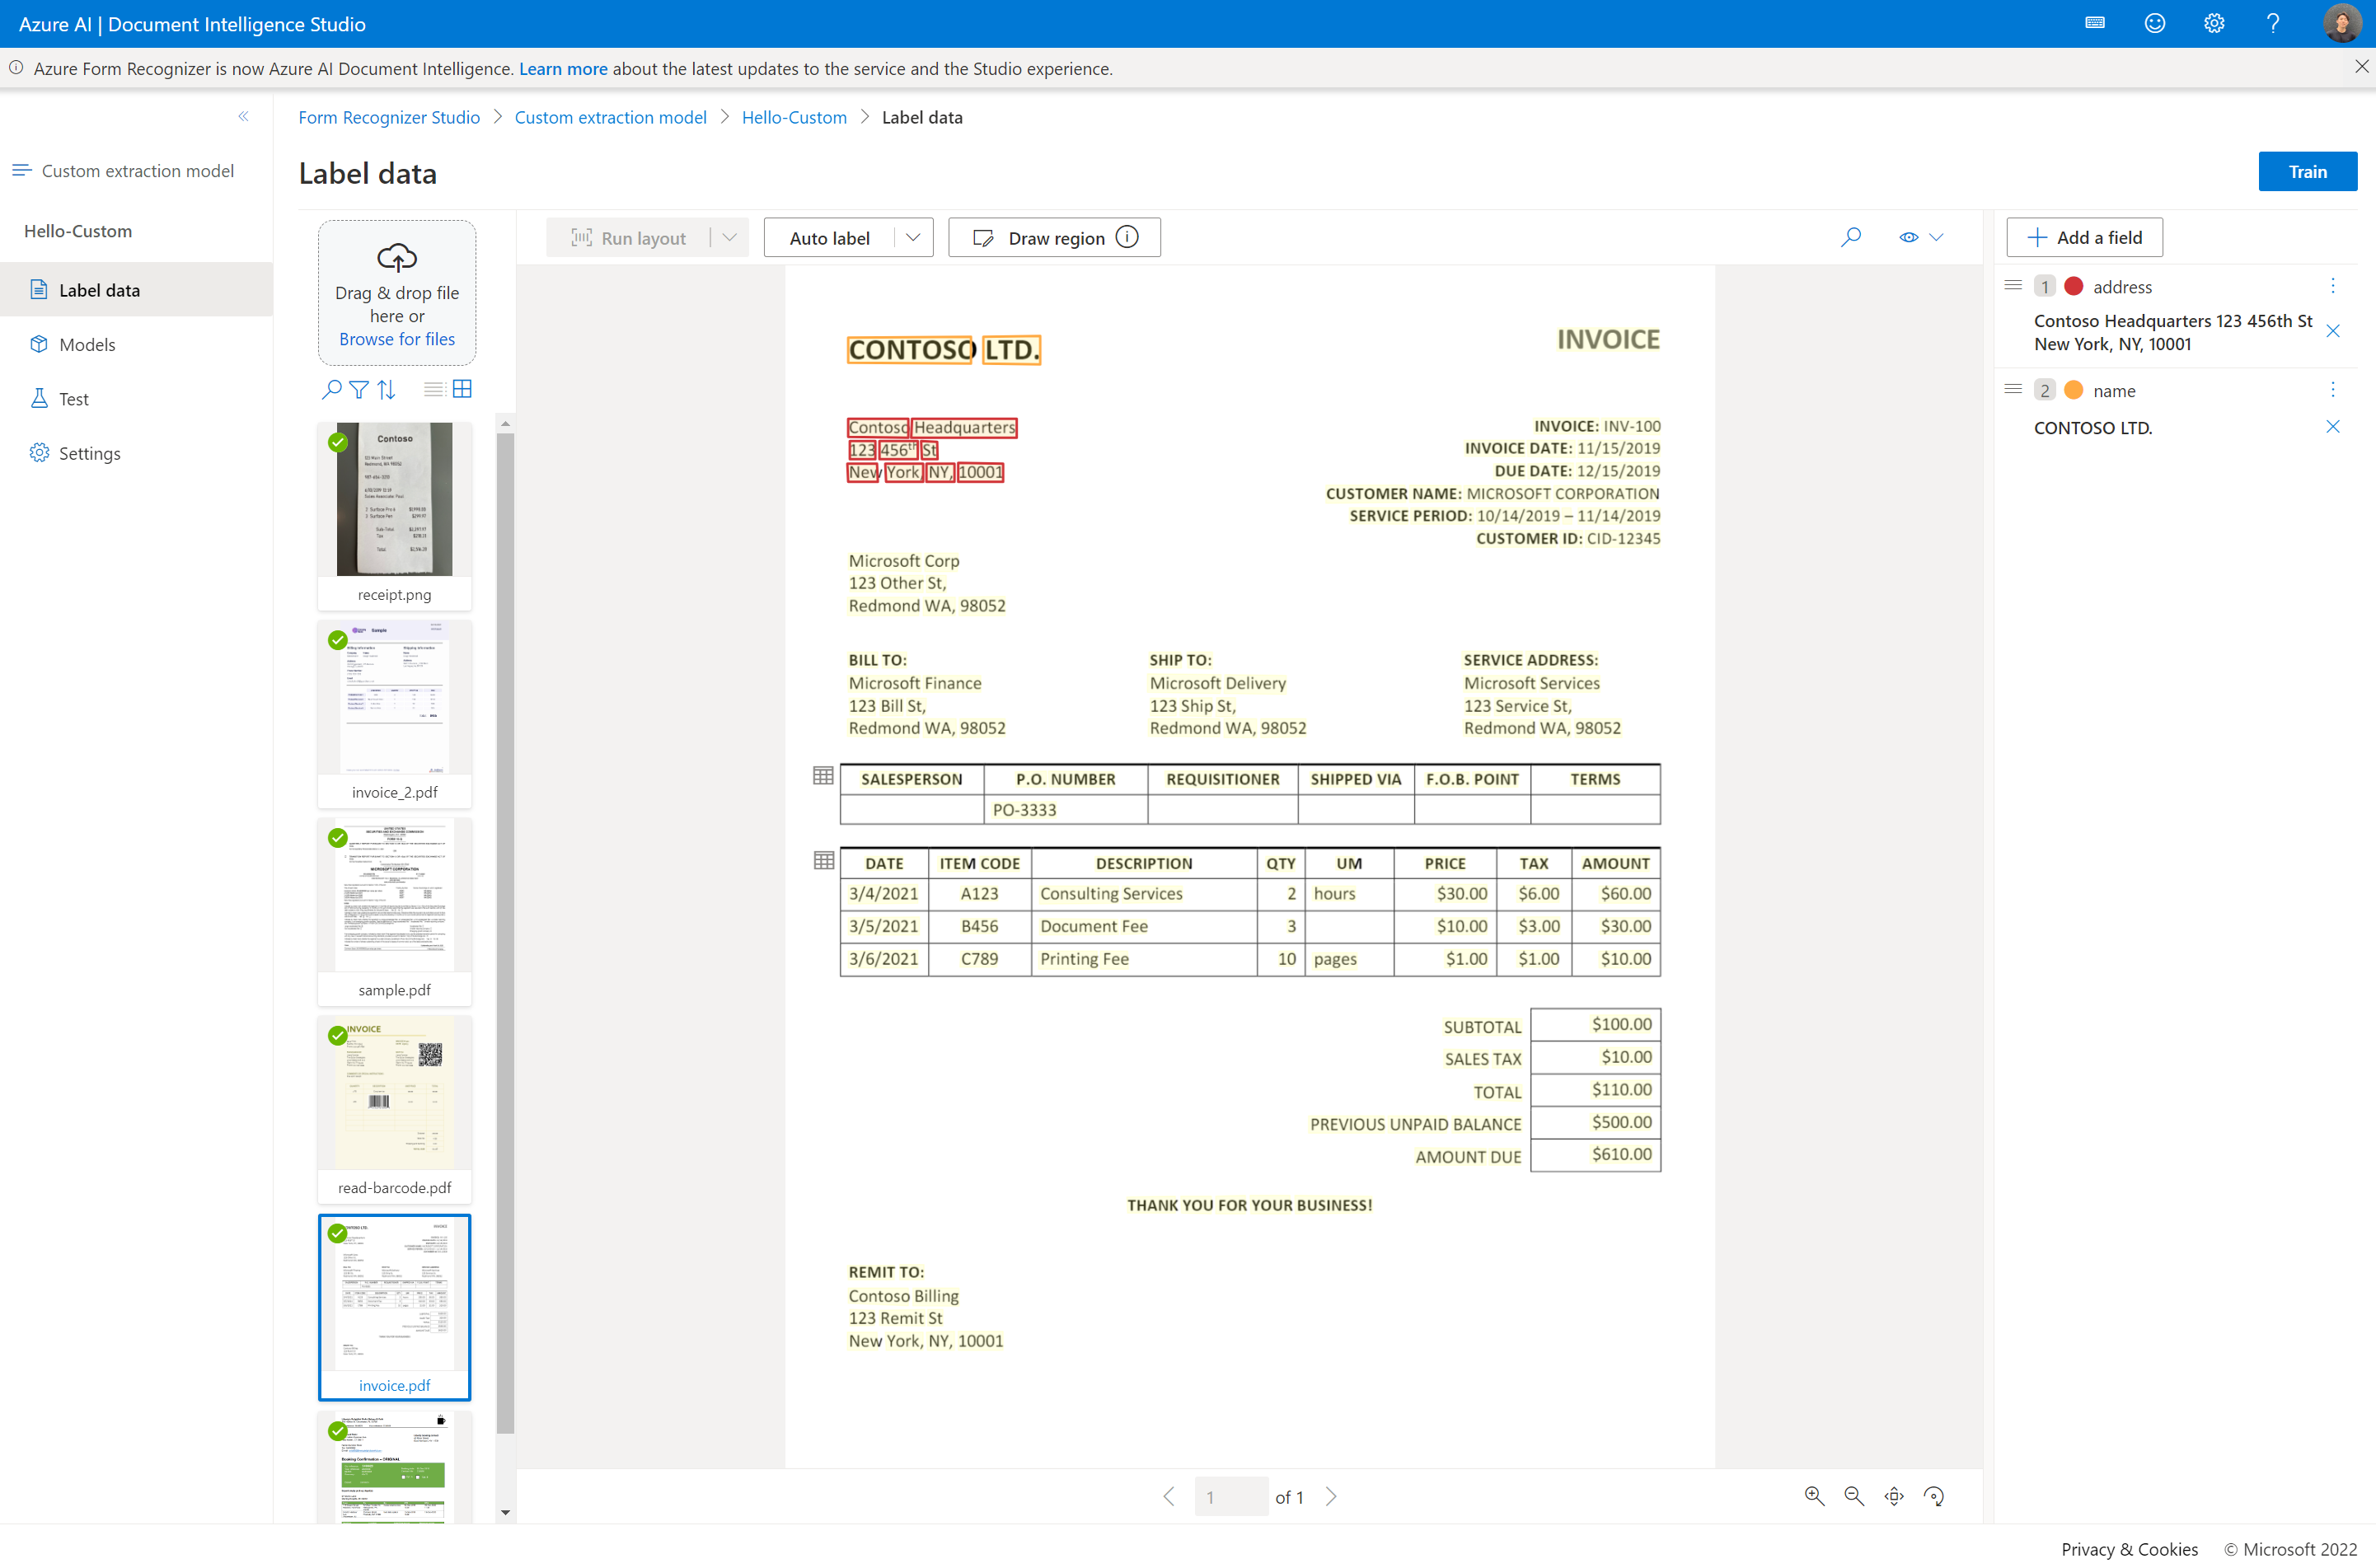 Screenshot of document list view options and filters.